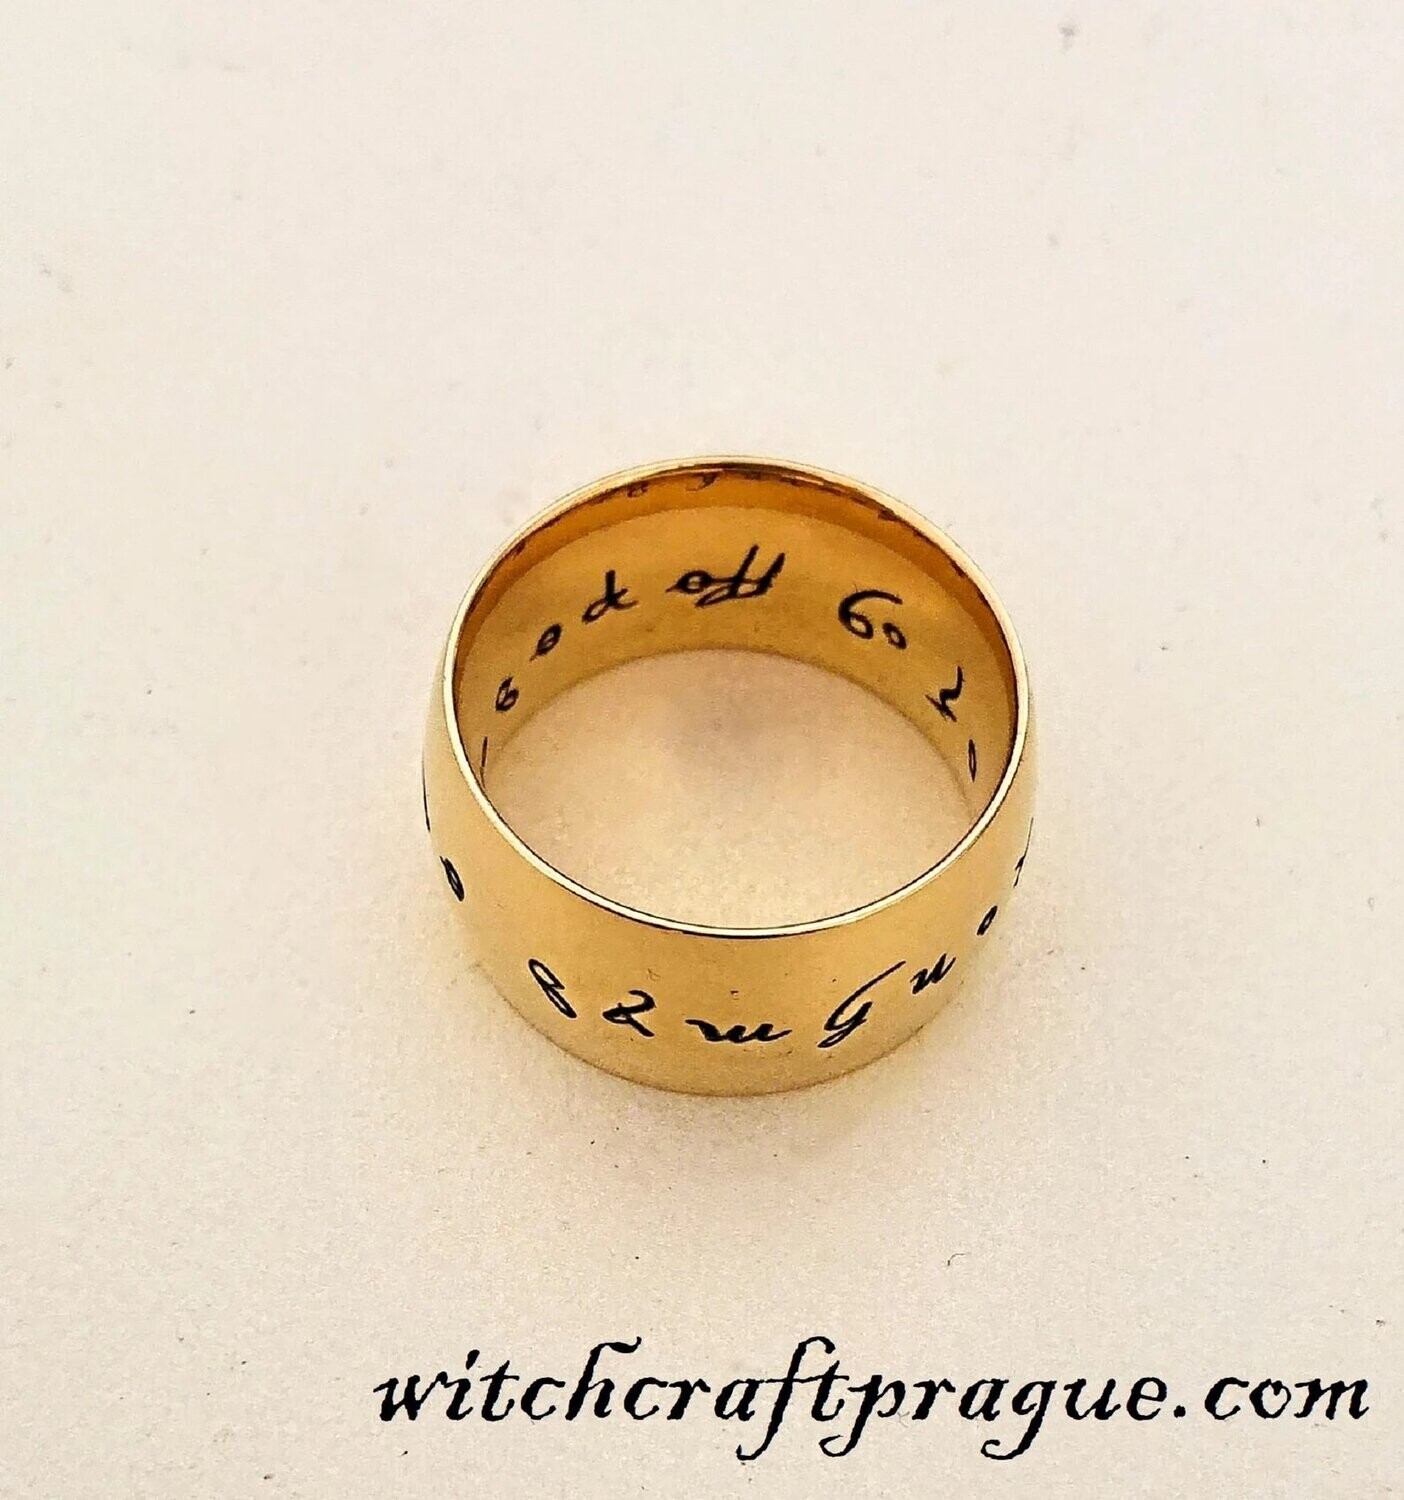 Witchcraft custom seal ring amulet